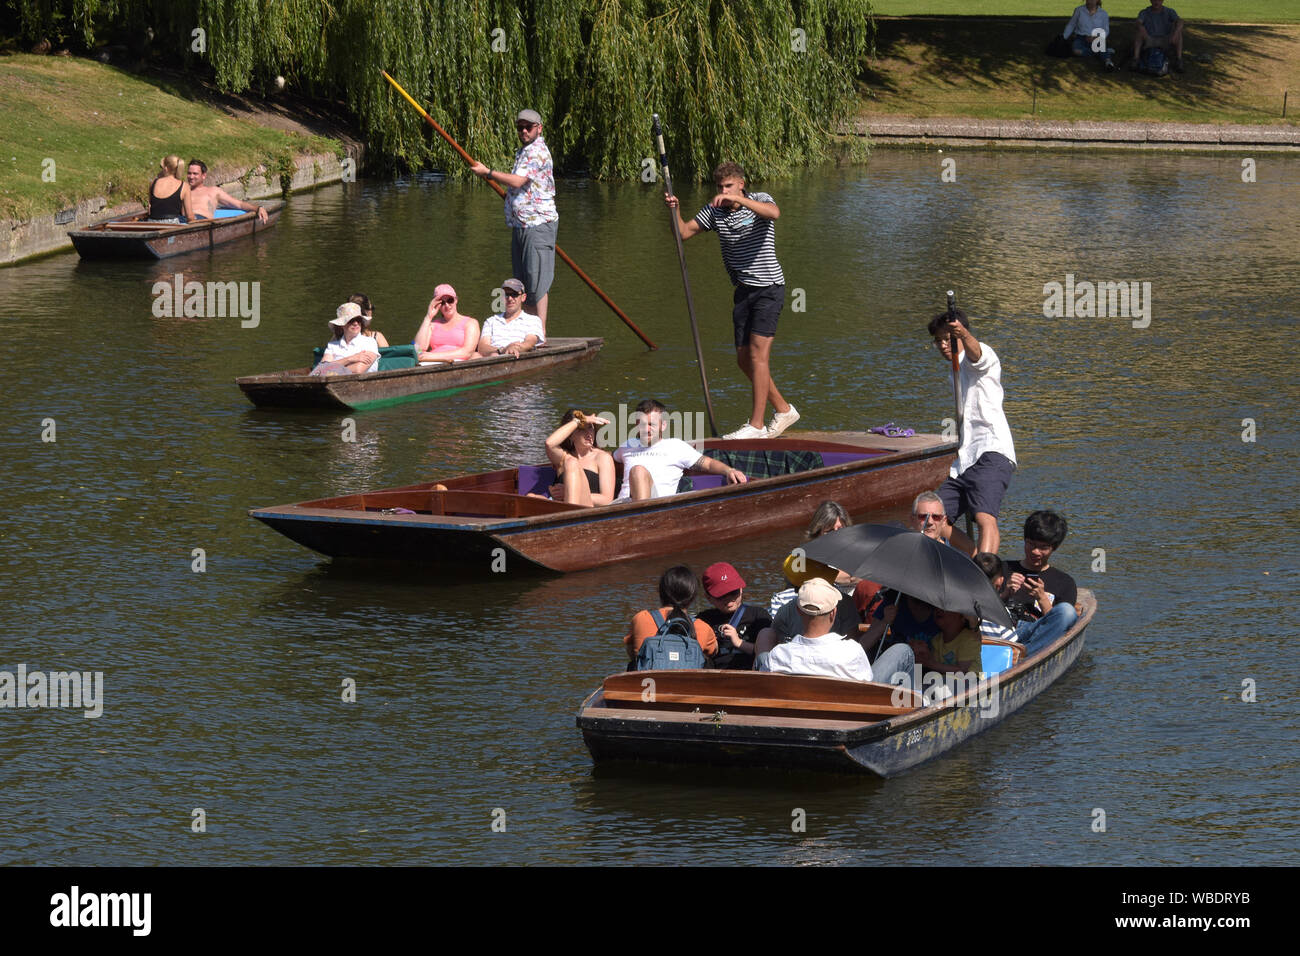 With record breaking August Bank Holiday temperatures visitors to Cambridge enjoy the weather by enjoying the river Cam in boats and Punts. Cambridge Stock Photo